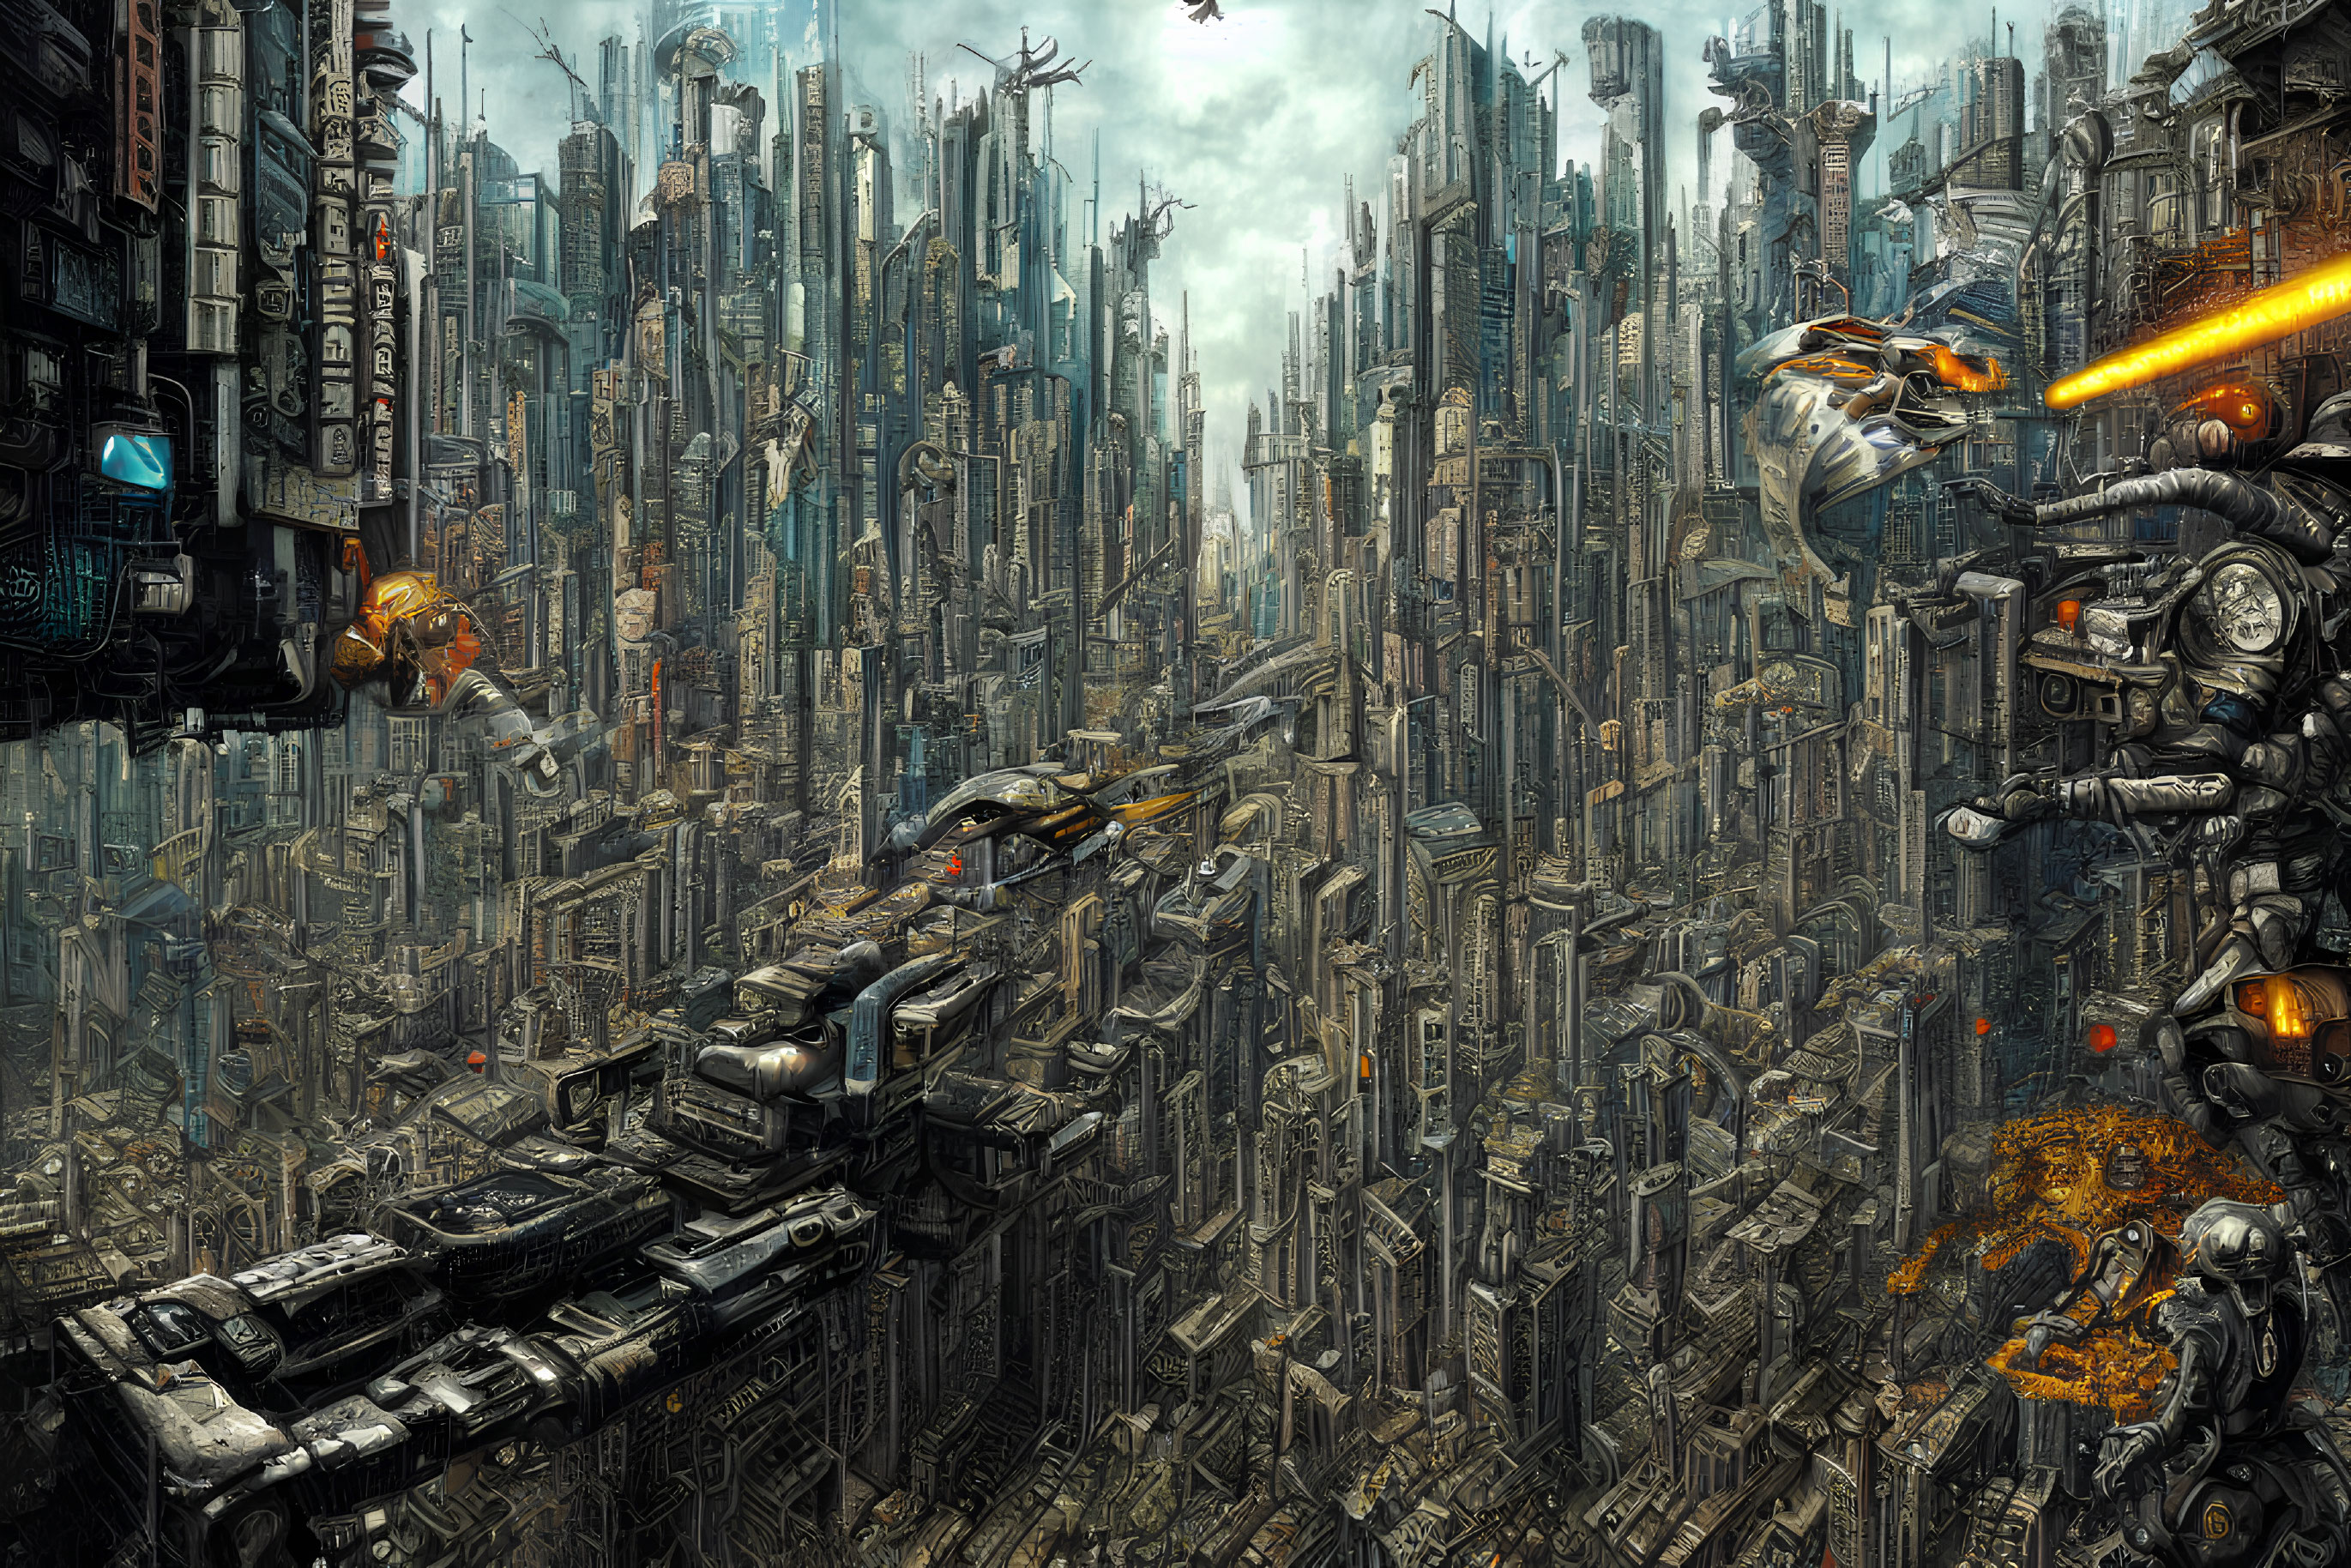 Futuristic sci-fi cityscape with skyscrapers, flying vehicles, and robotic structures